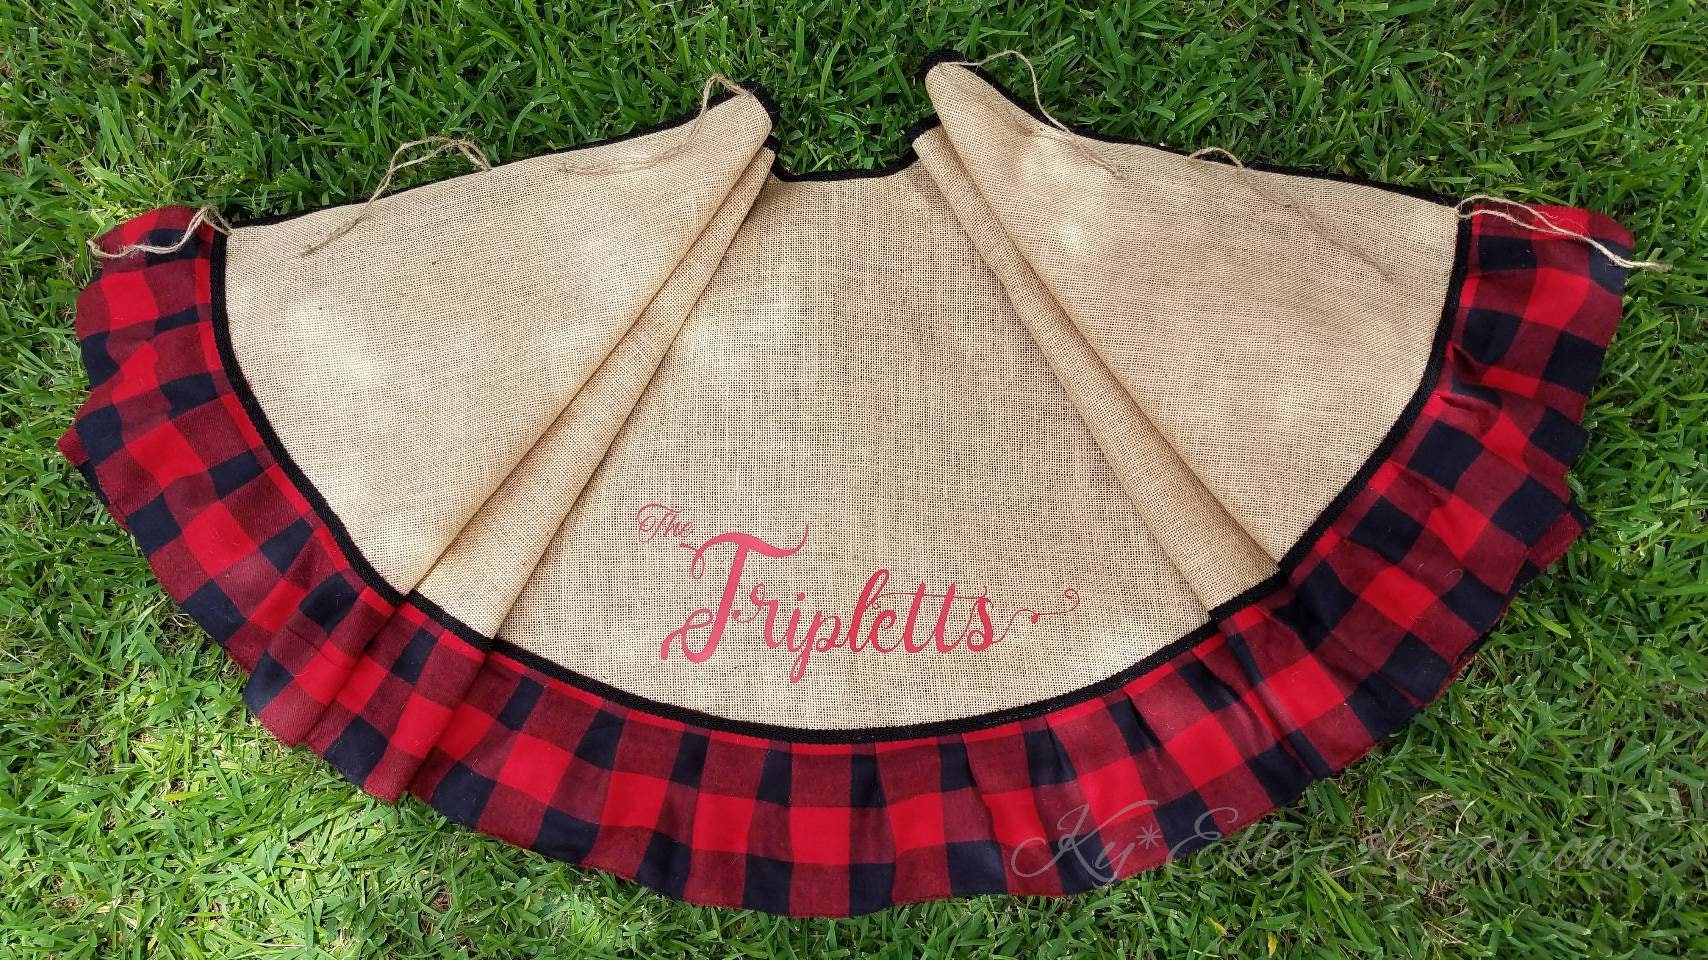 Red & Black Buffalo Plaid, Burlap Christmas Tree Skirt displayed with personalized family name, The Triplets in red,